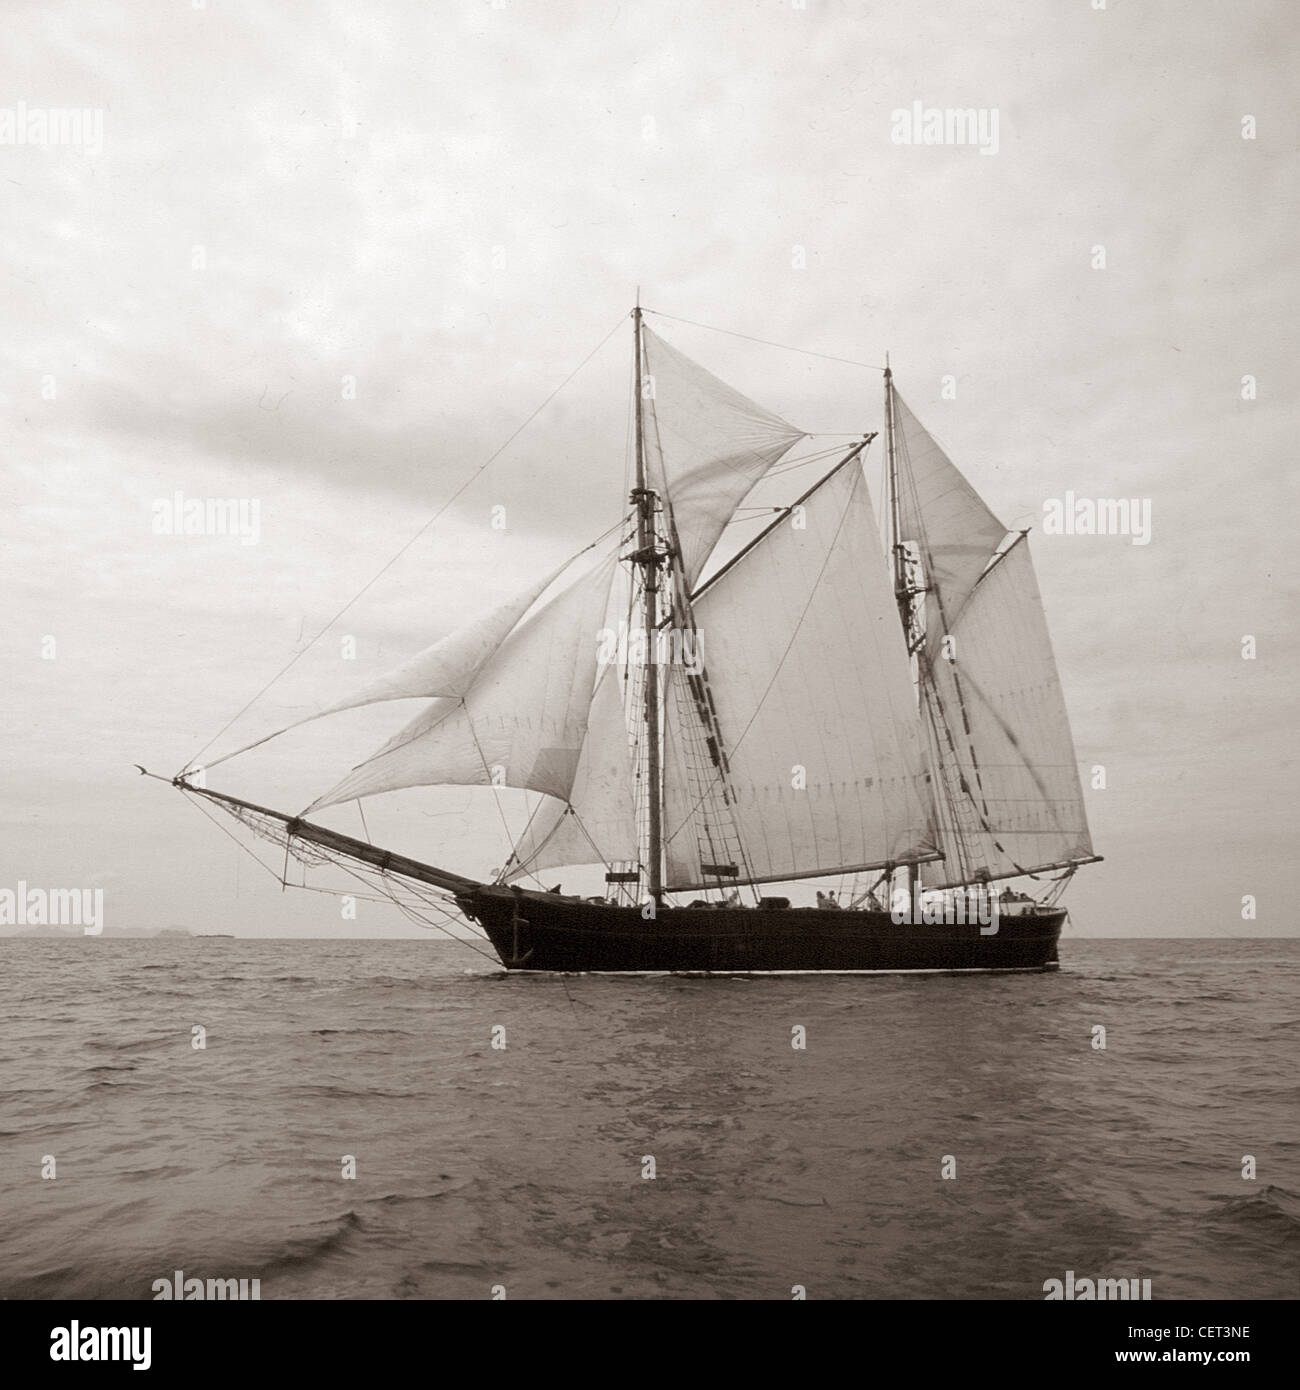 Klaraborg, constructed in 1859, a gaff-rigged ketch, Baltic trading ship under sail in the South Pacific 1976. The 'Klaraborg' burned while anchored. Stock Photo